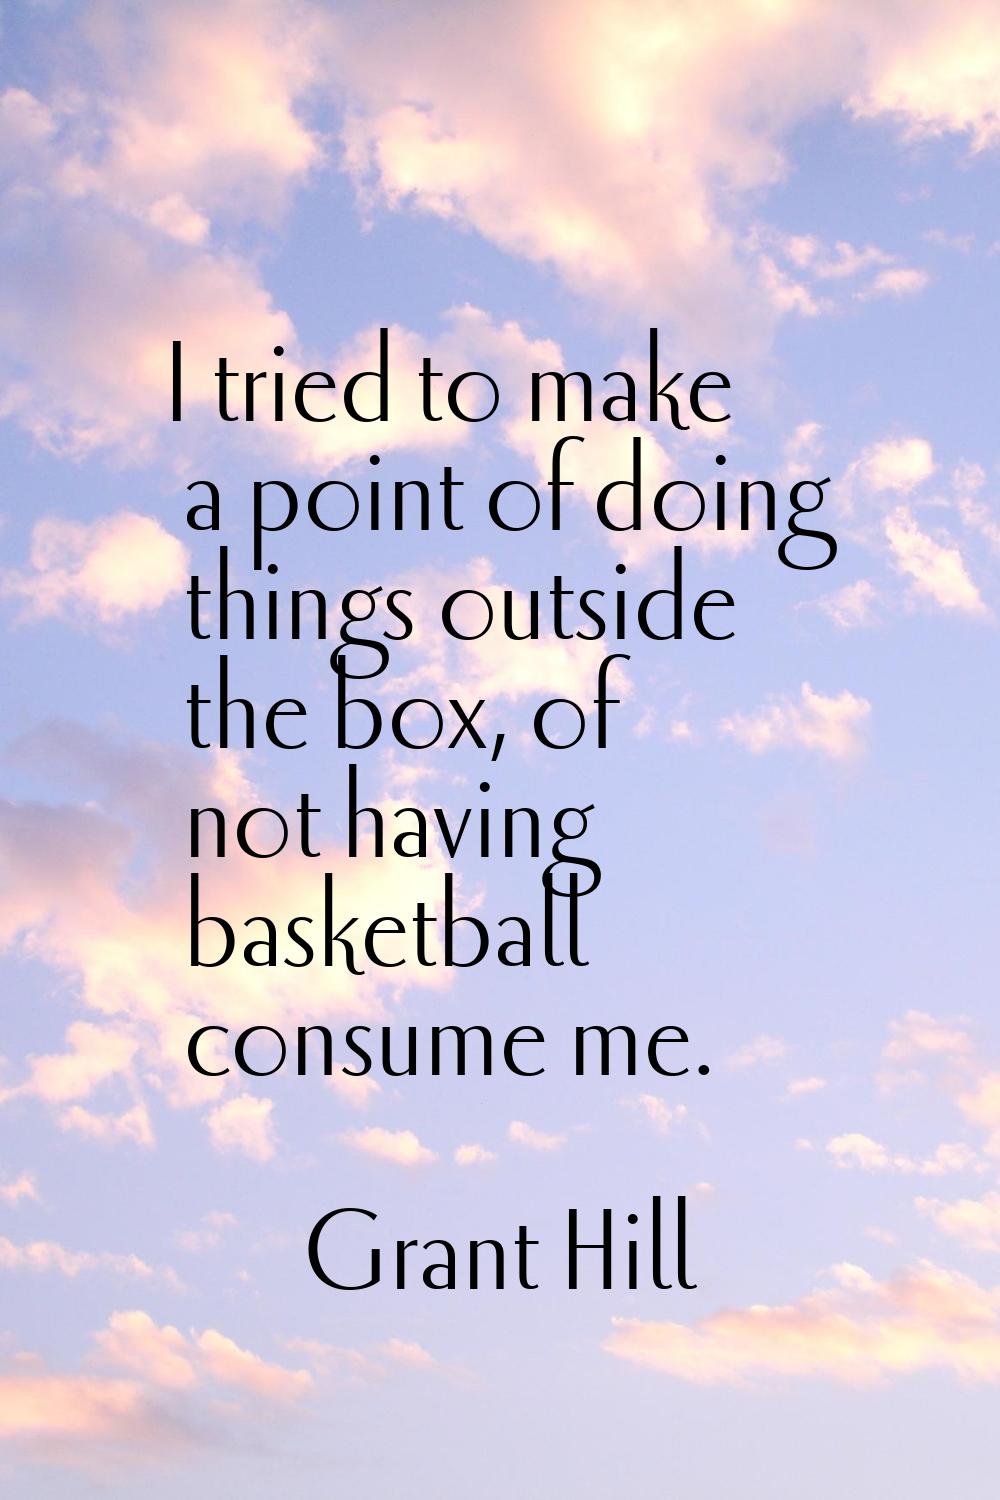 I tried to make a point of doing things outside the box, of not having basketball consume me.